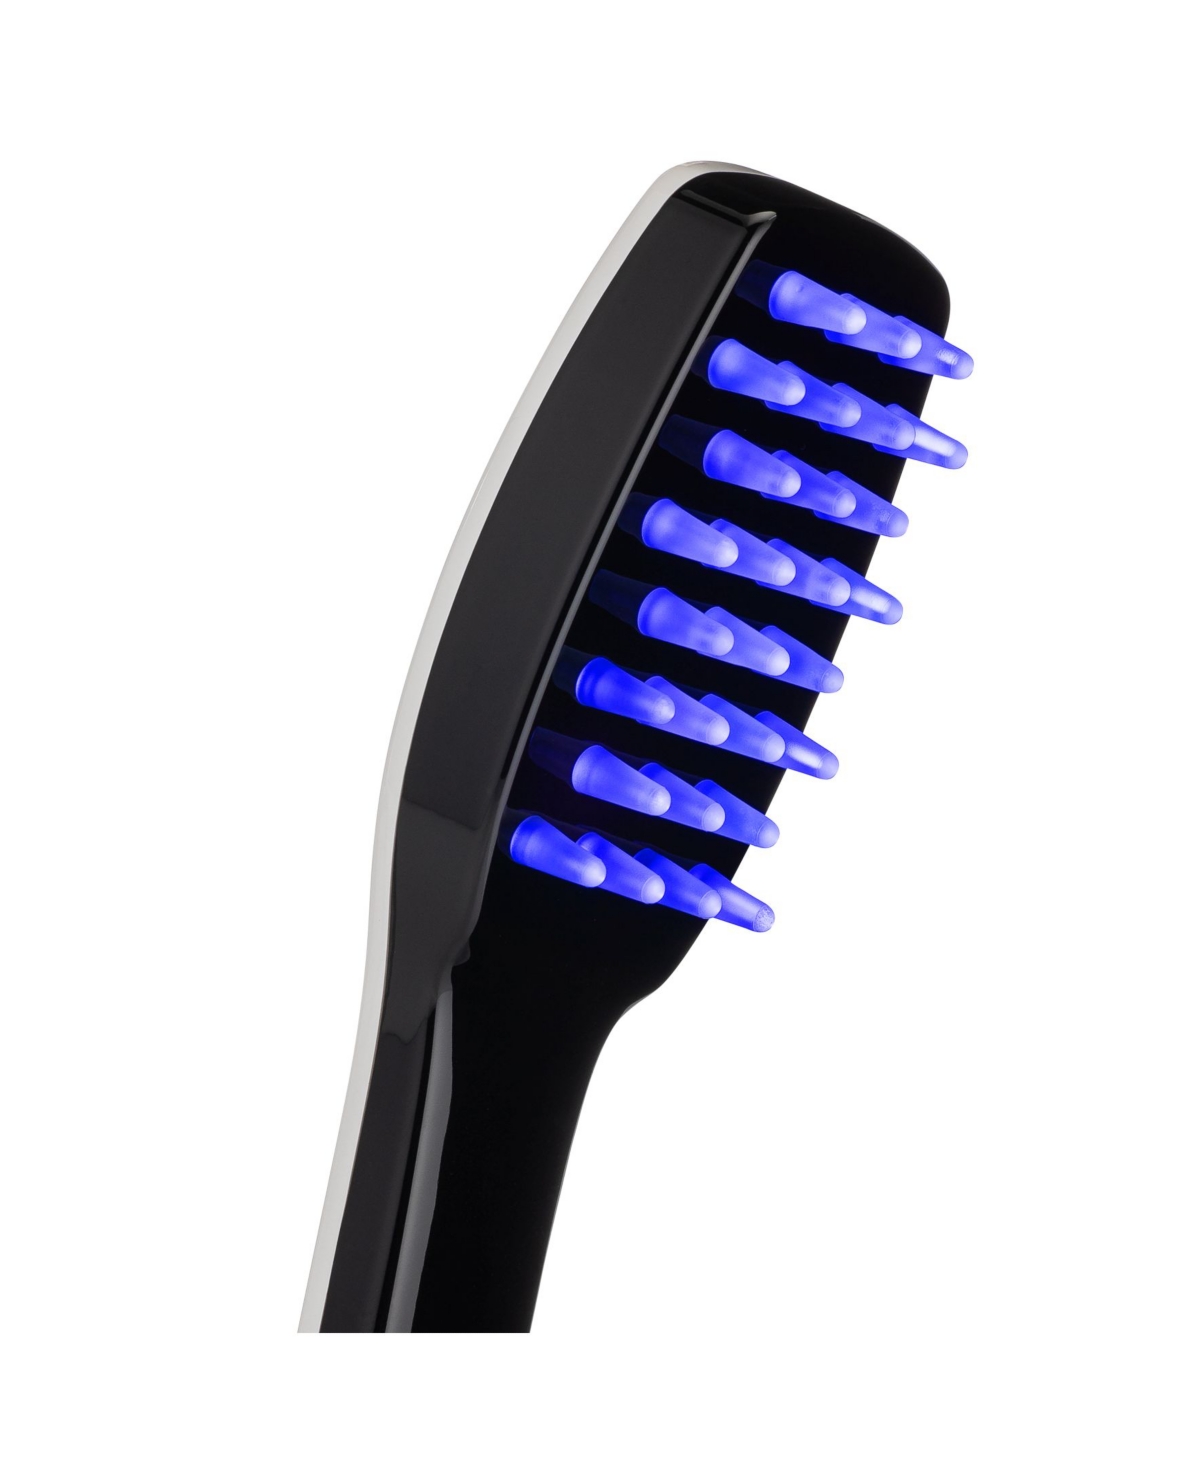 Intensive Hair and Scalp Led Light Therapy Hair Brush - Black, White